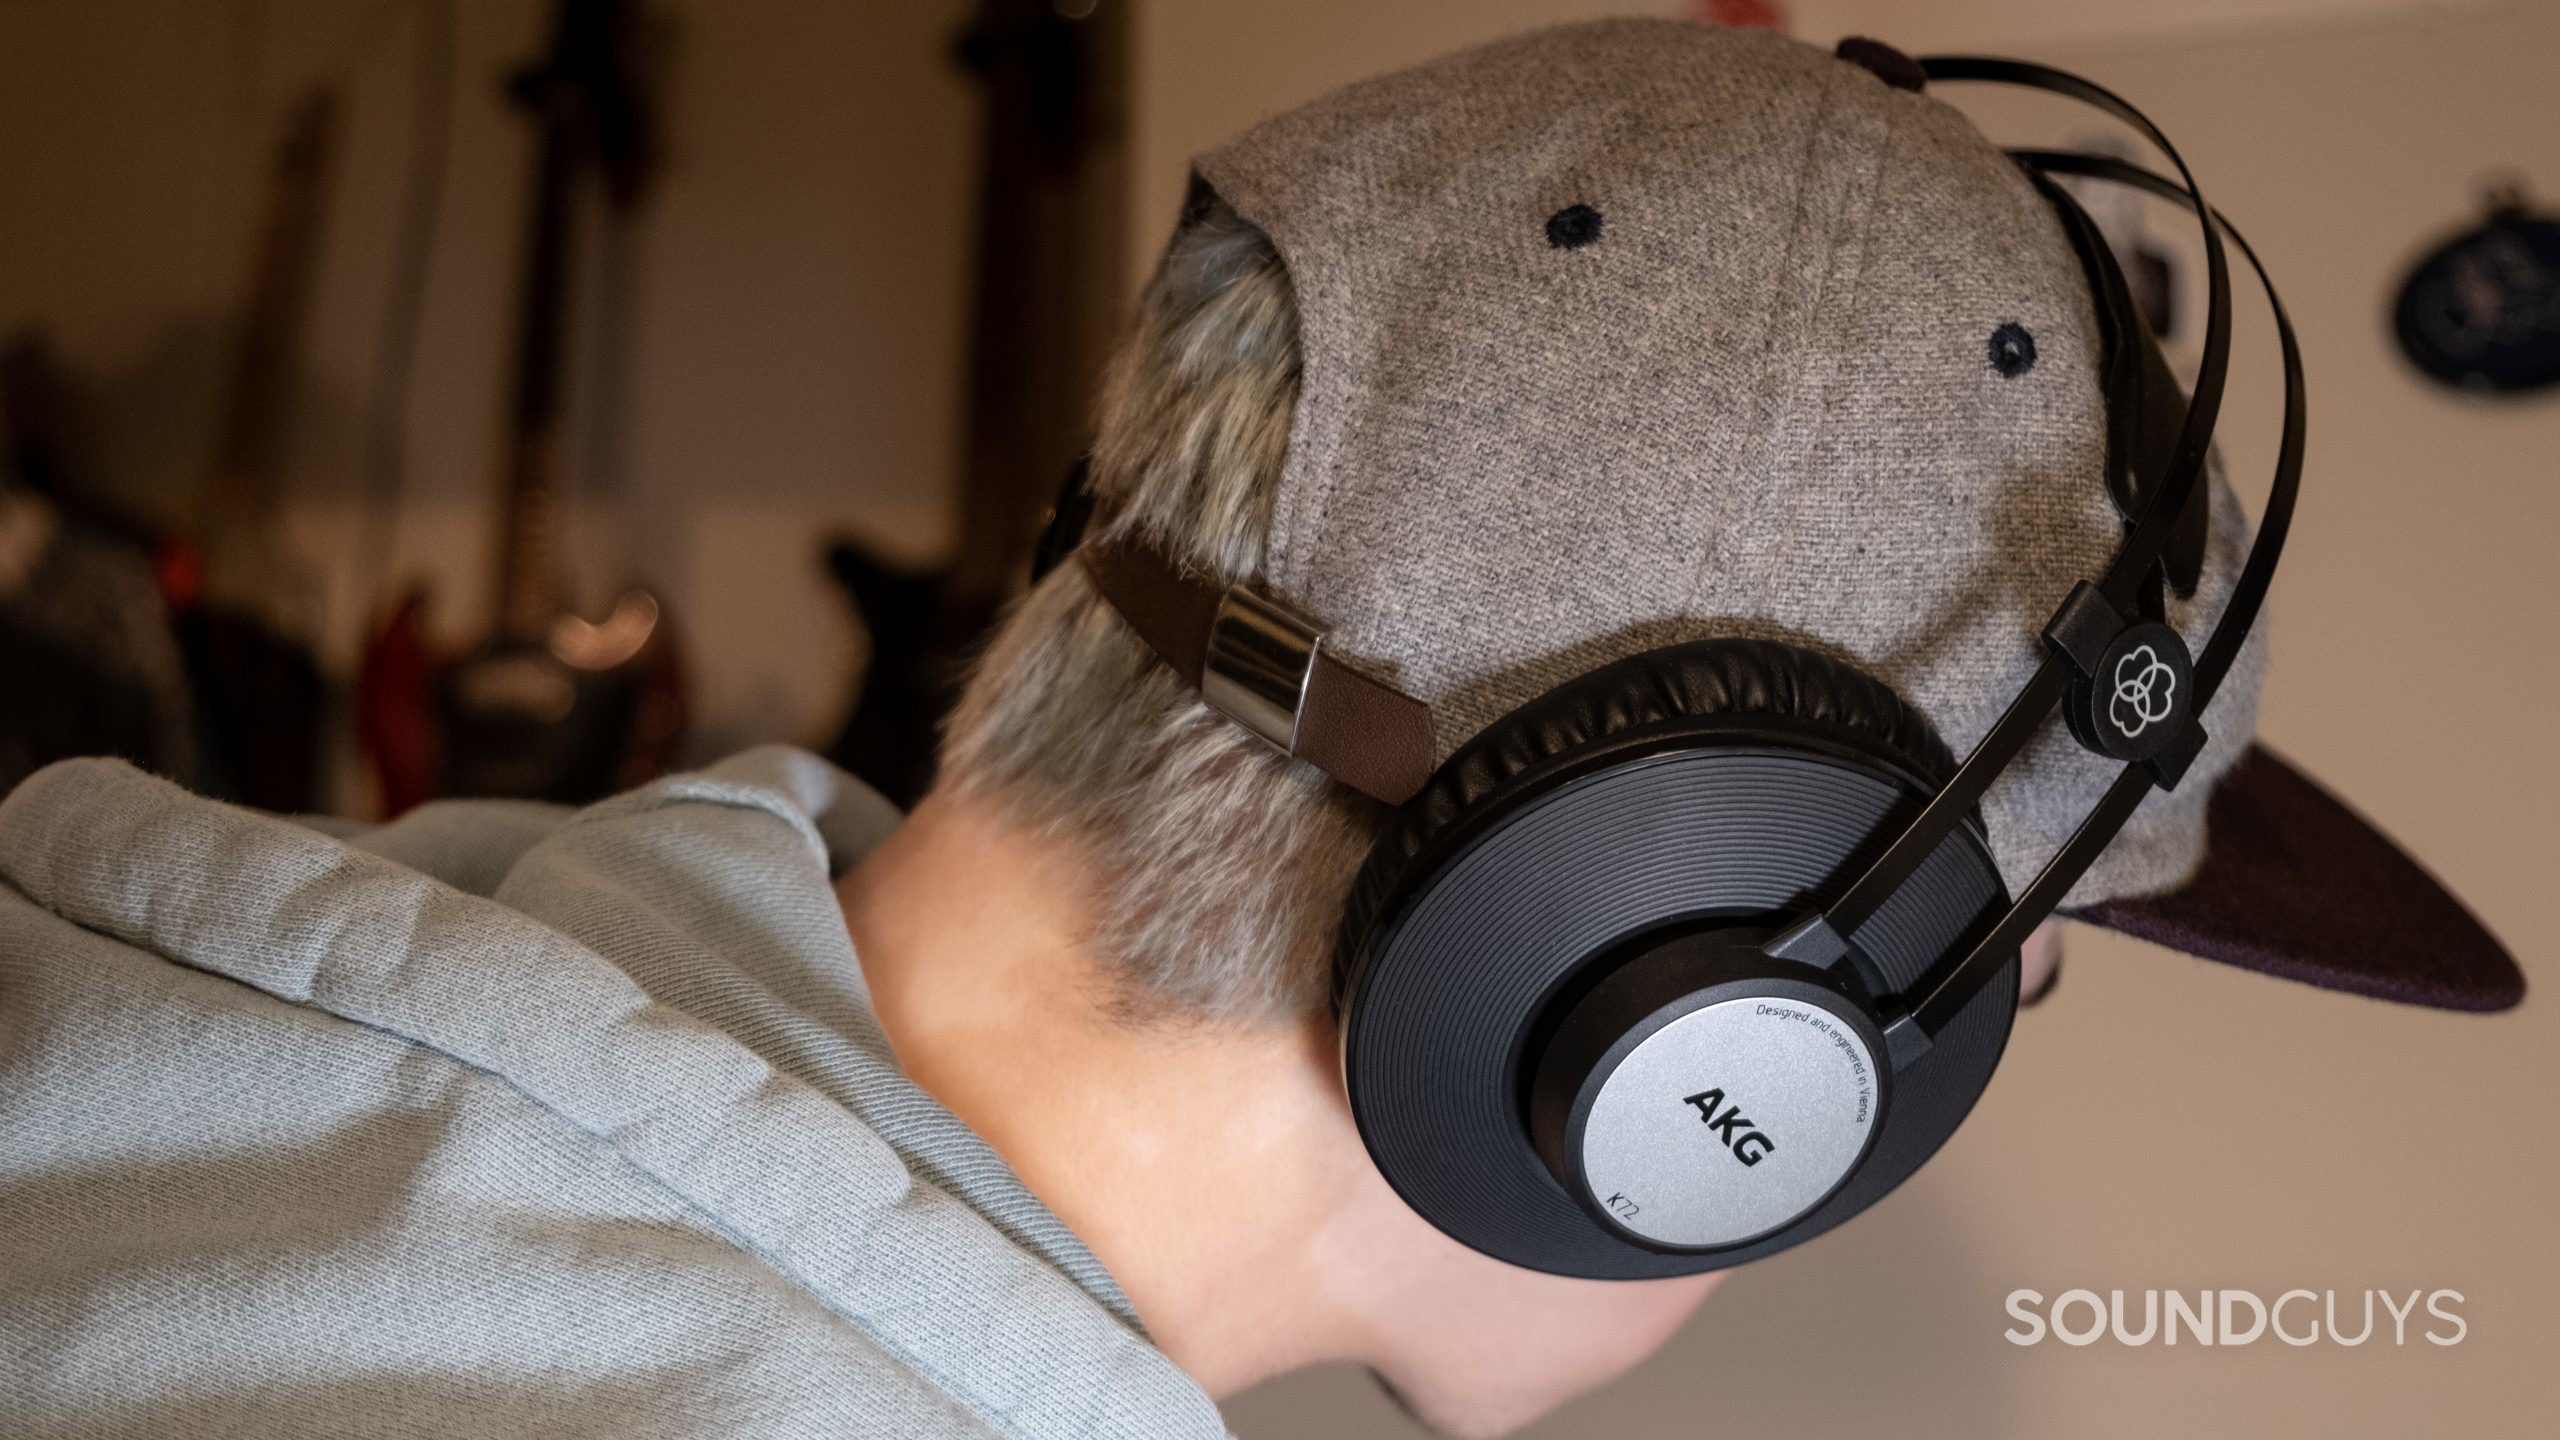 The AKG K72 as worn on a person facing away from the camera wearing a hat.